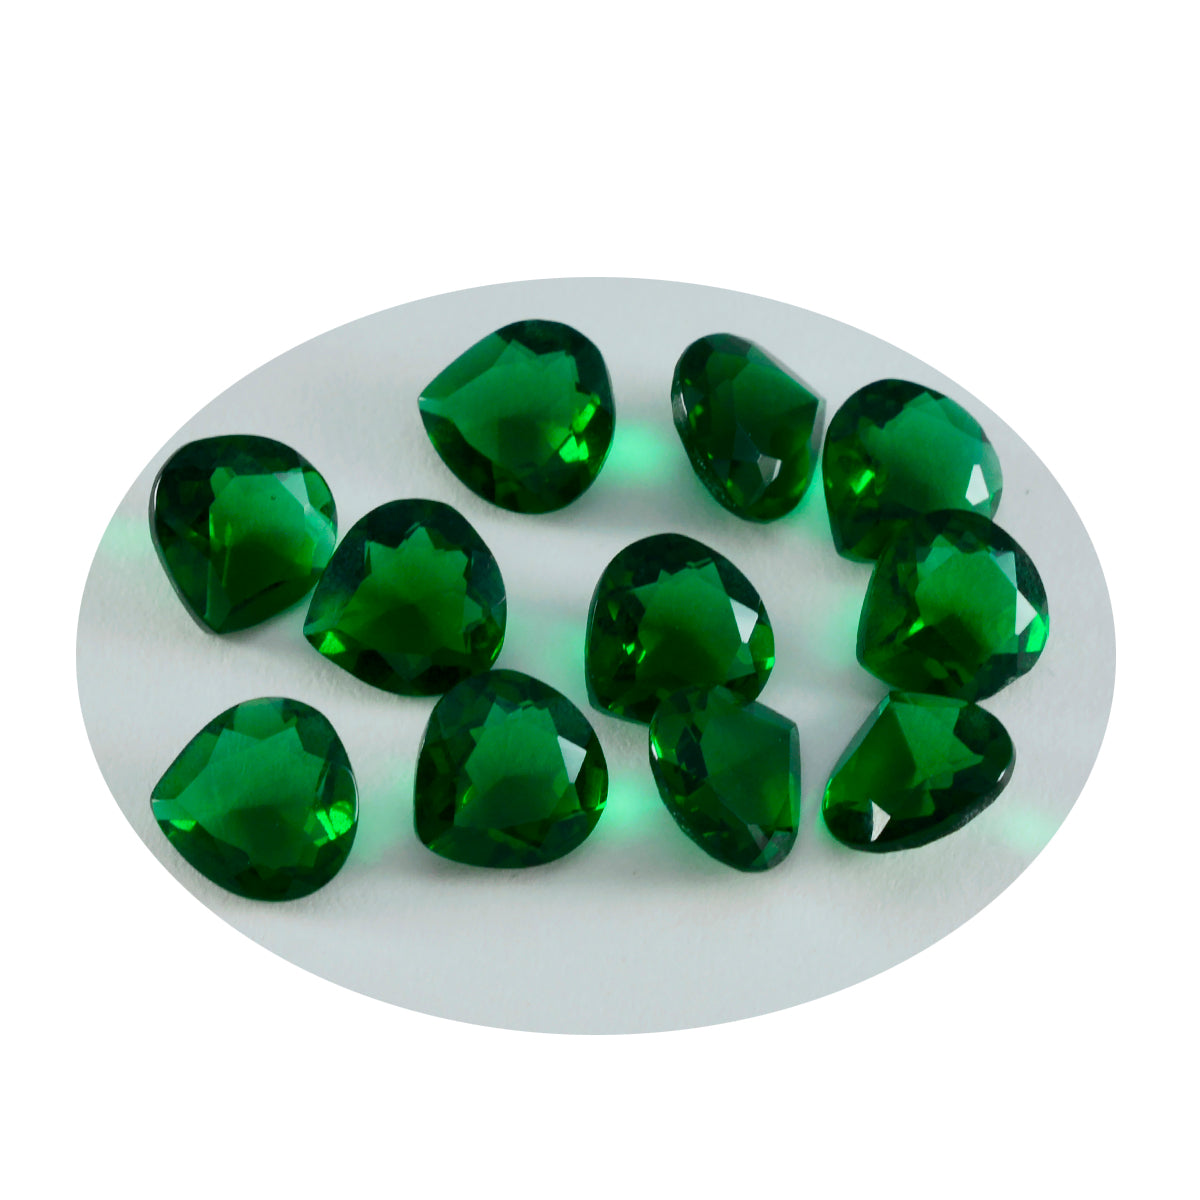 Riyogems 1PC Green Emerald CZ Faceted 4x4 mm Heart Shape excellent Quality Loose Stone